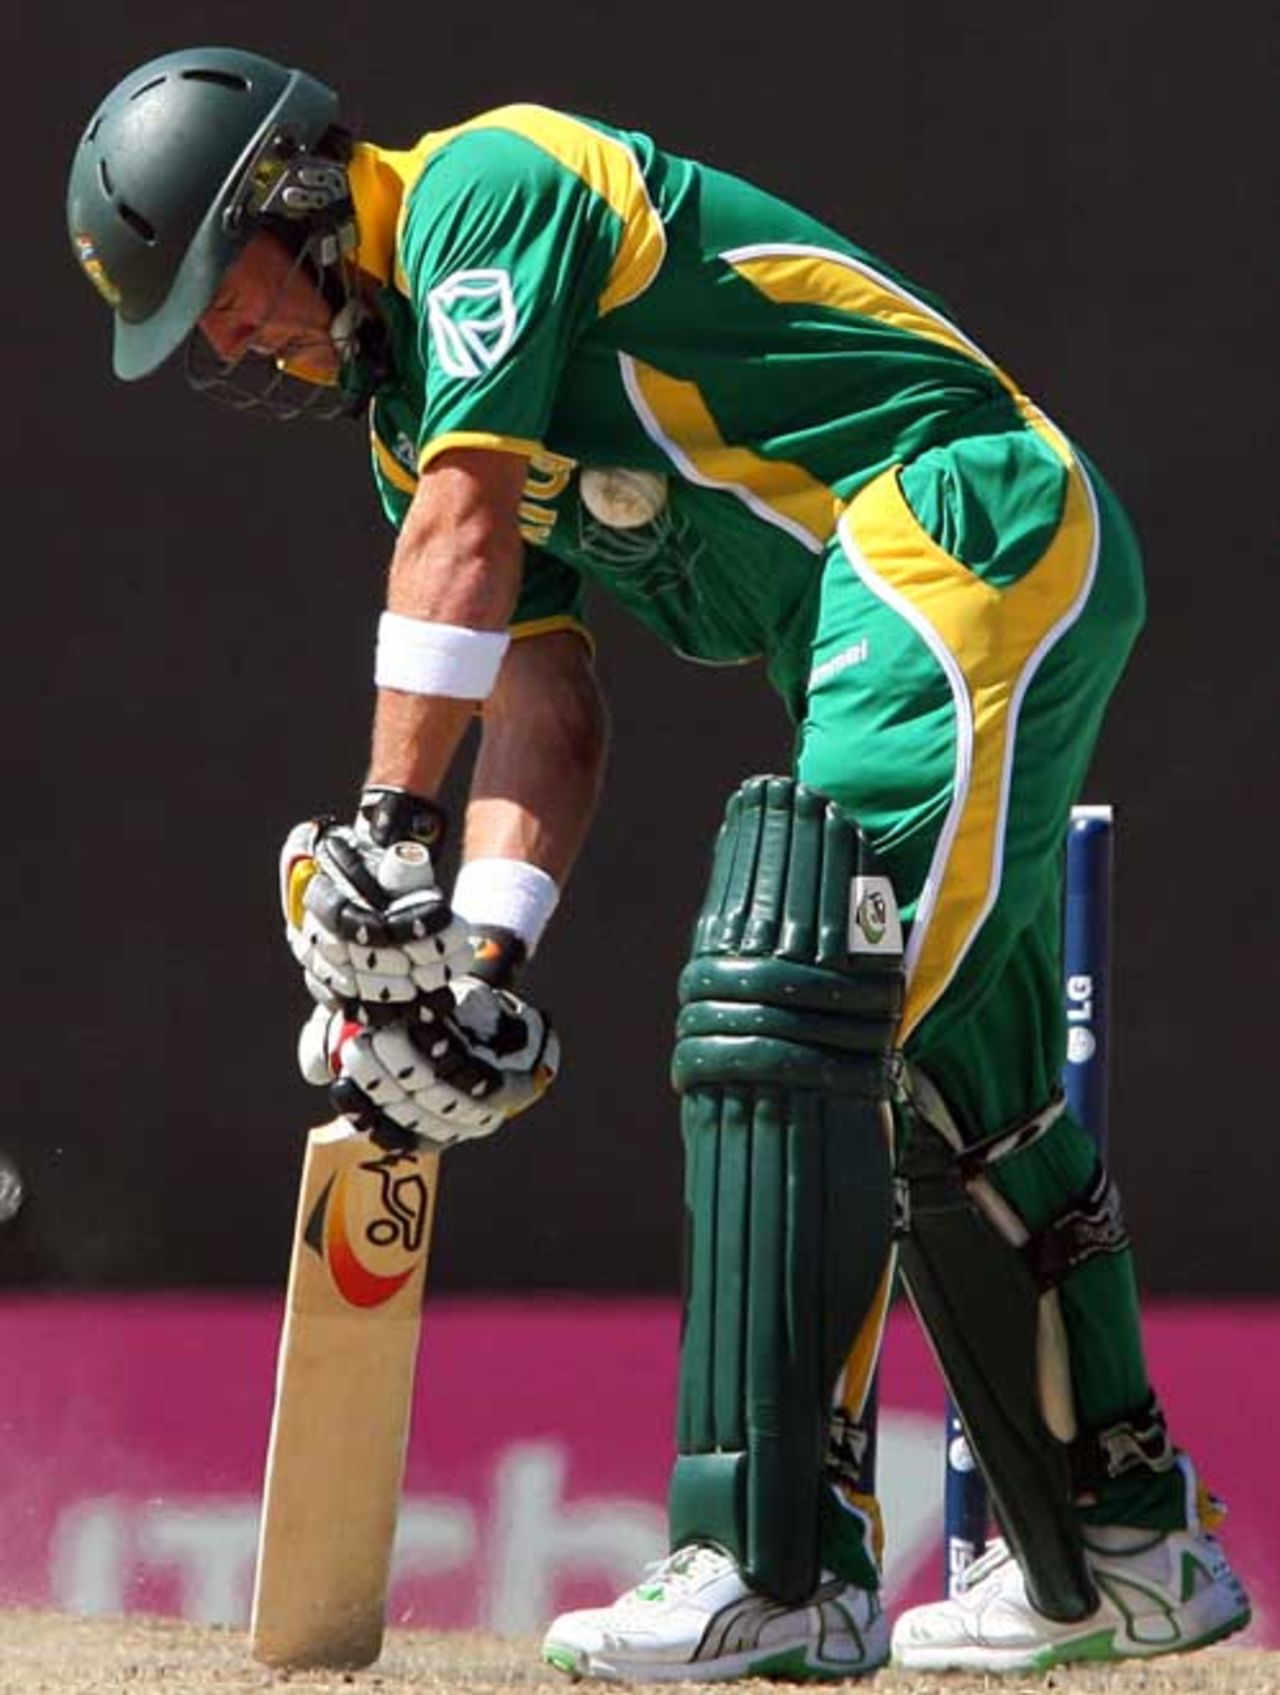 Ab de Villiers winces in pain after copping one from Glenn McGrath, Group A, St Kitts, March 24, 2007